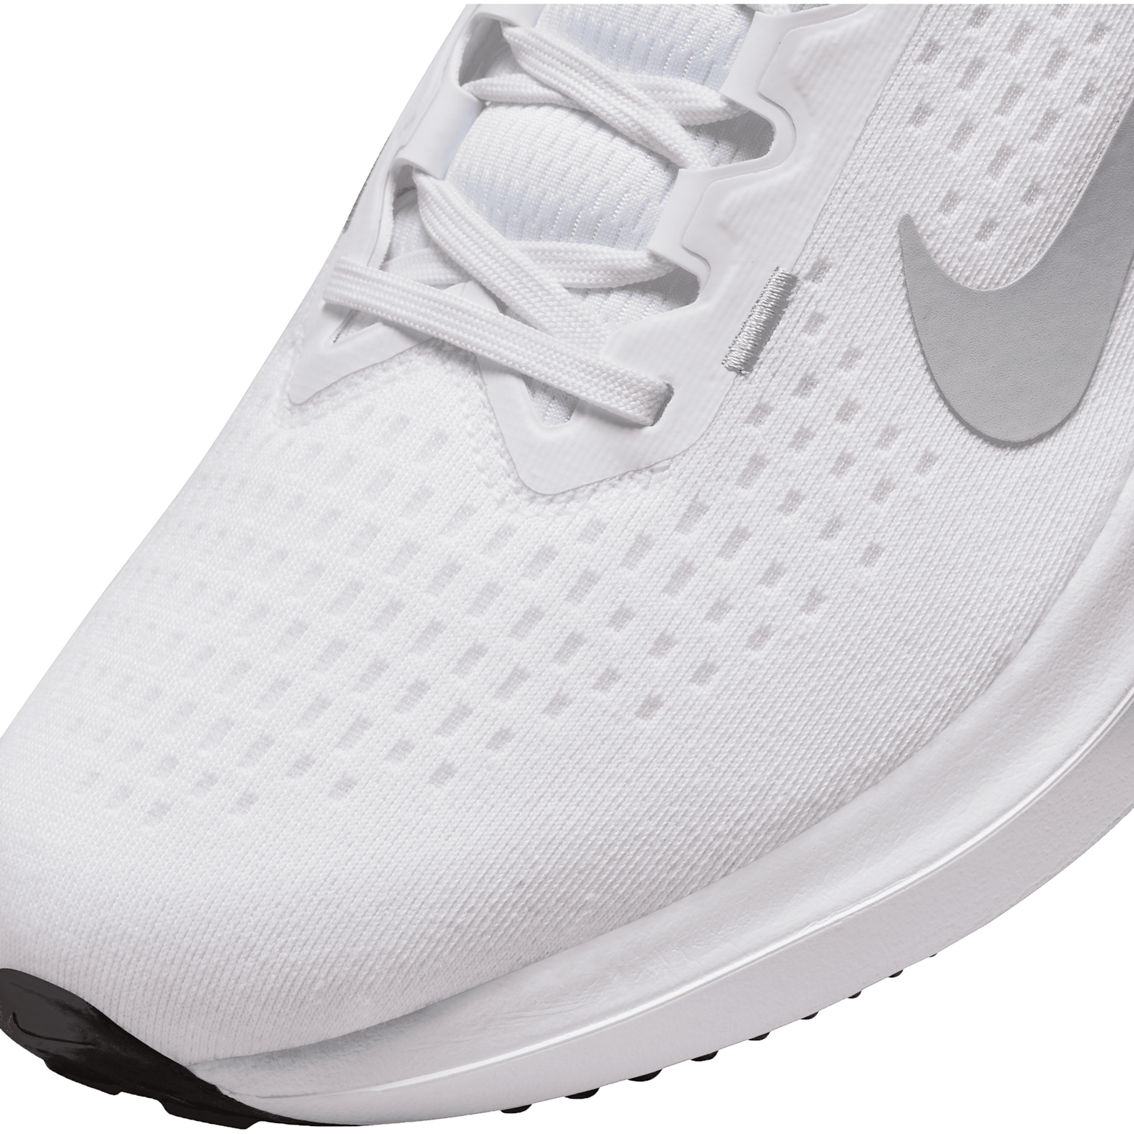 Nike Men's Zoom Winflo 10 Running Shoes - Image 7 of 8